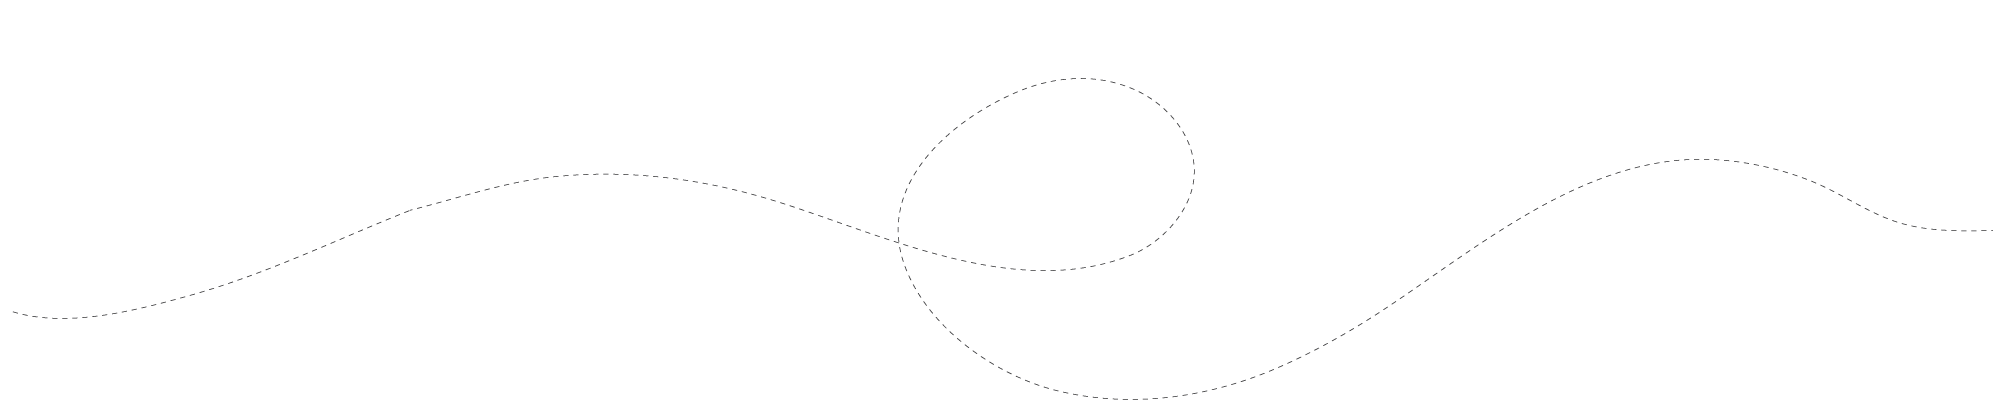 dotted-line-only